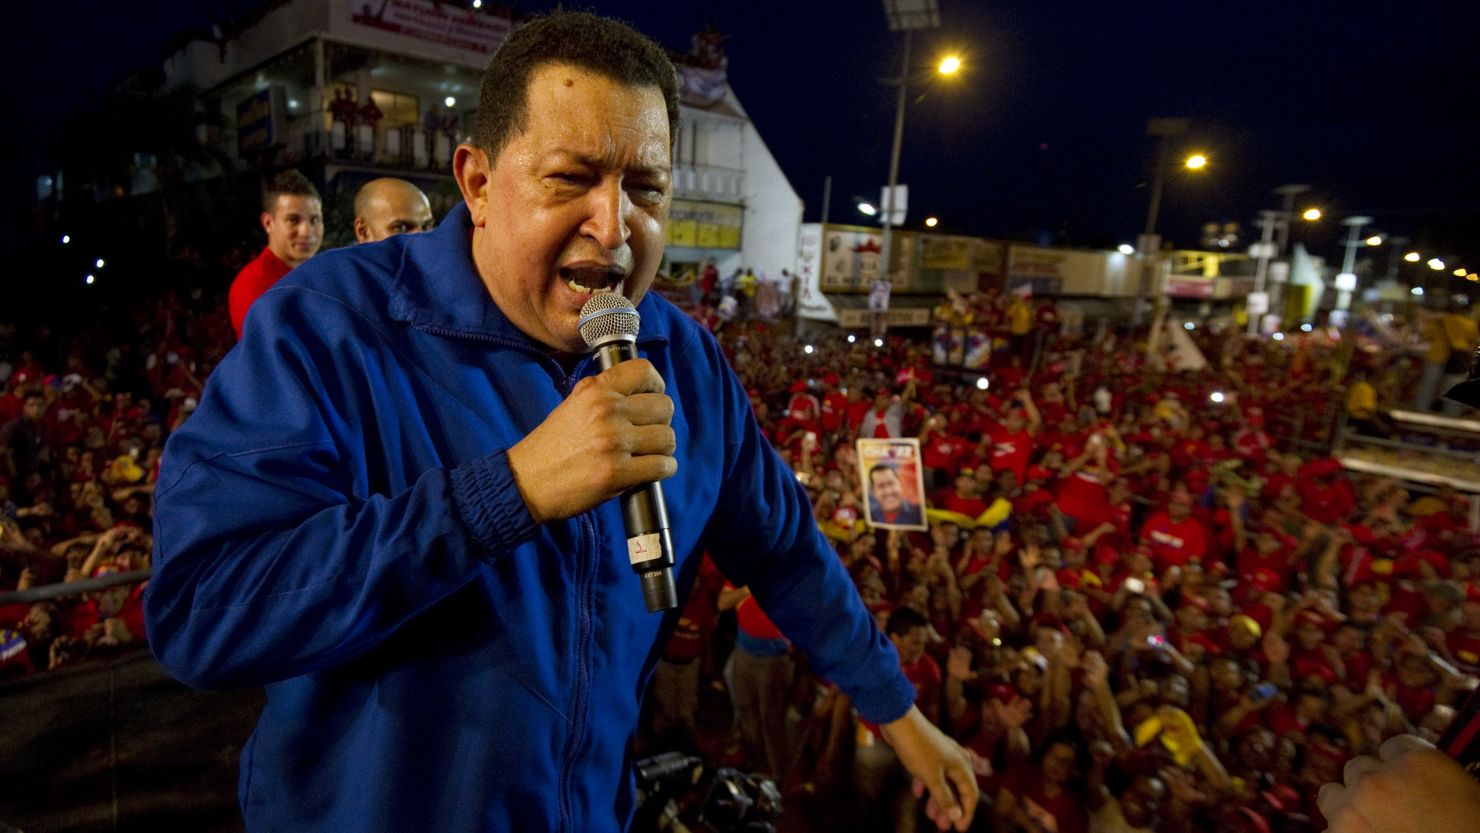 Hugo Chavez, who was Venezuela's youngest president when he took power in 1998, is now 58.